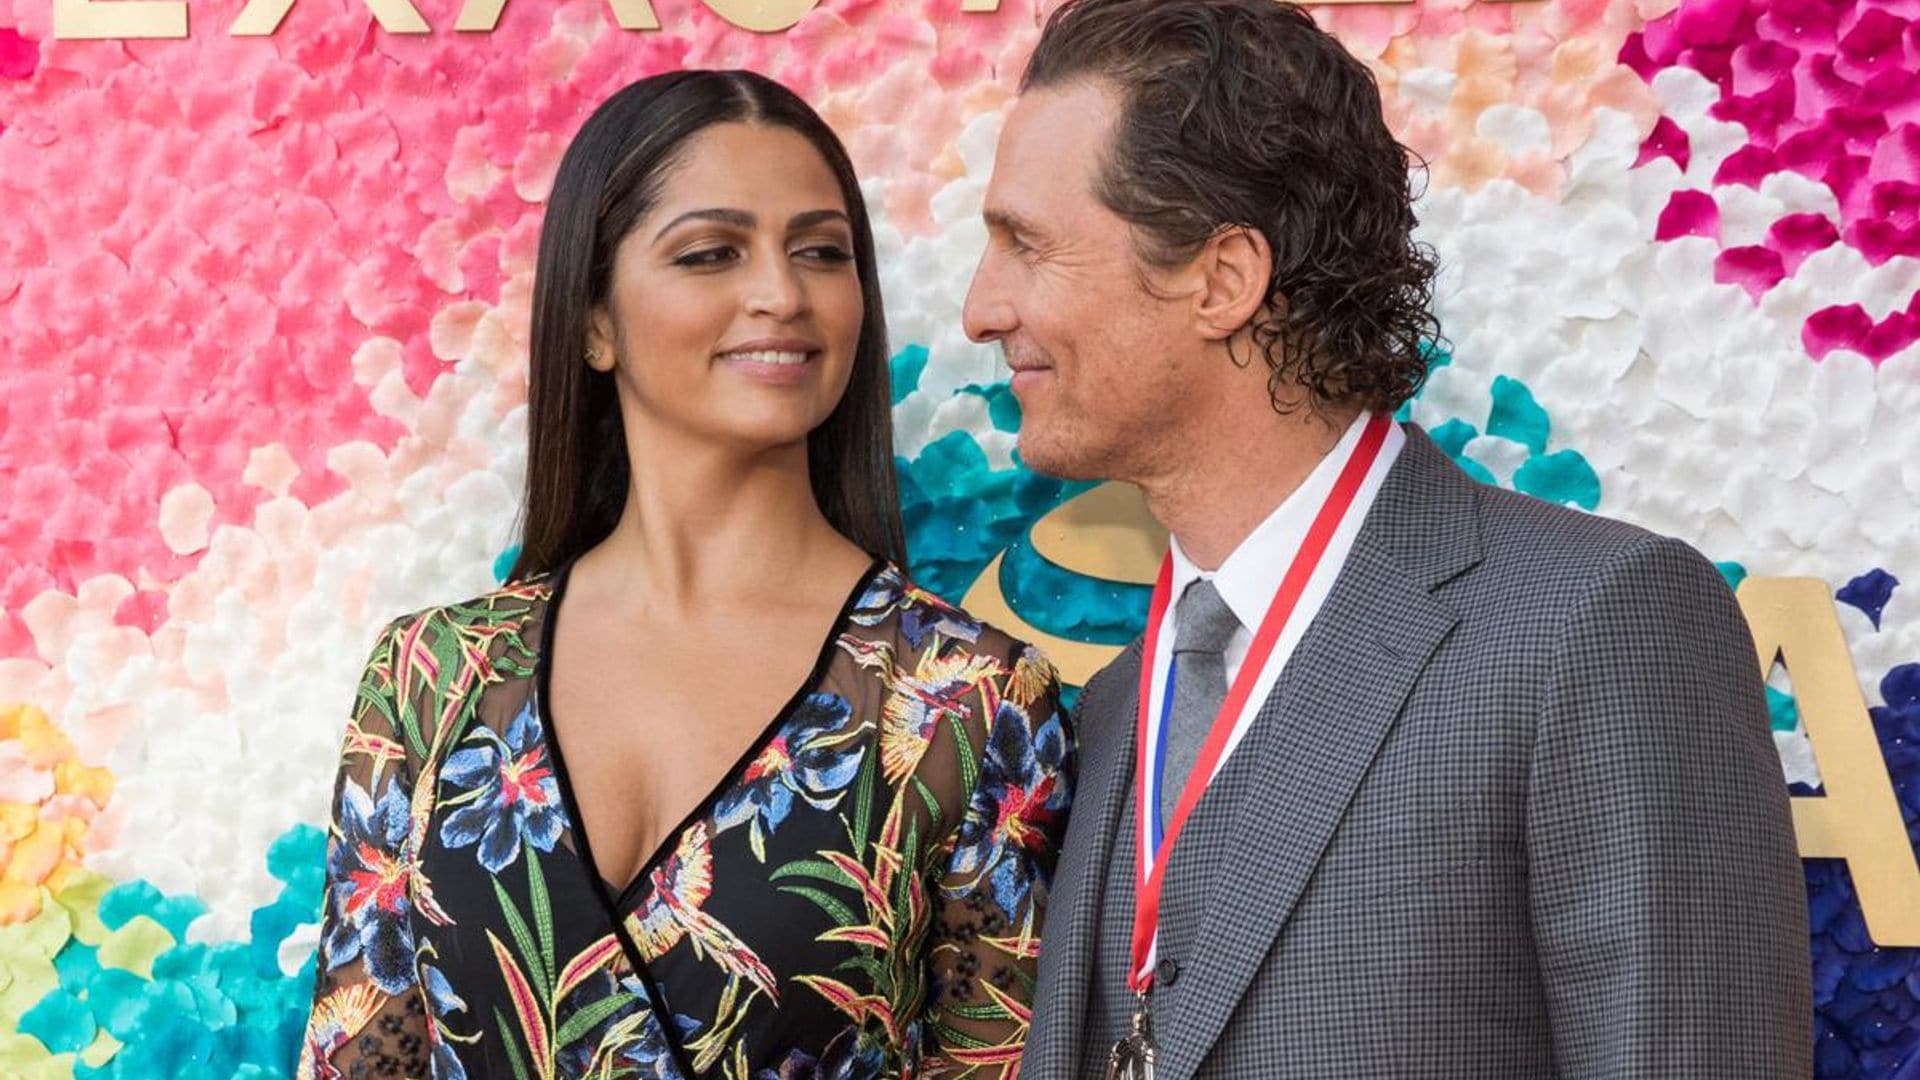 Matthew McConaughey is obsessed with Camila Alves McConaughey’s yuca fries